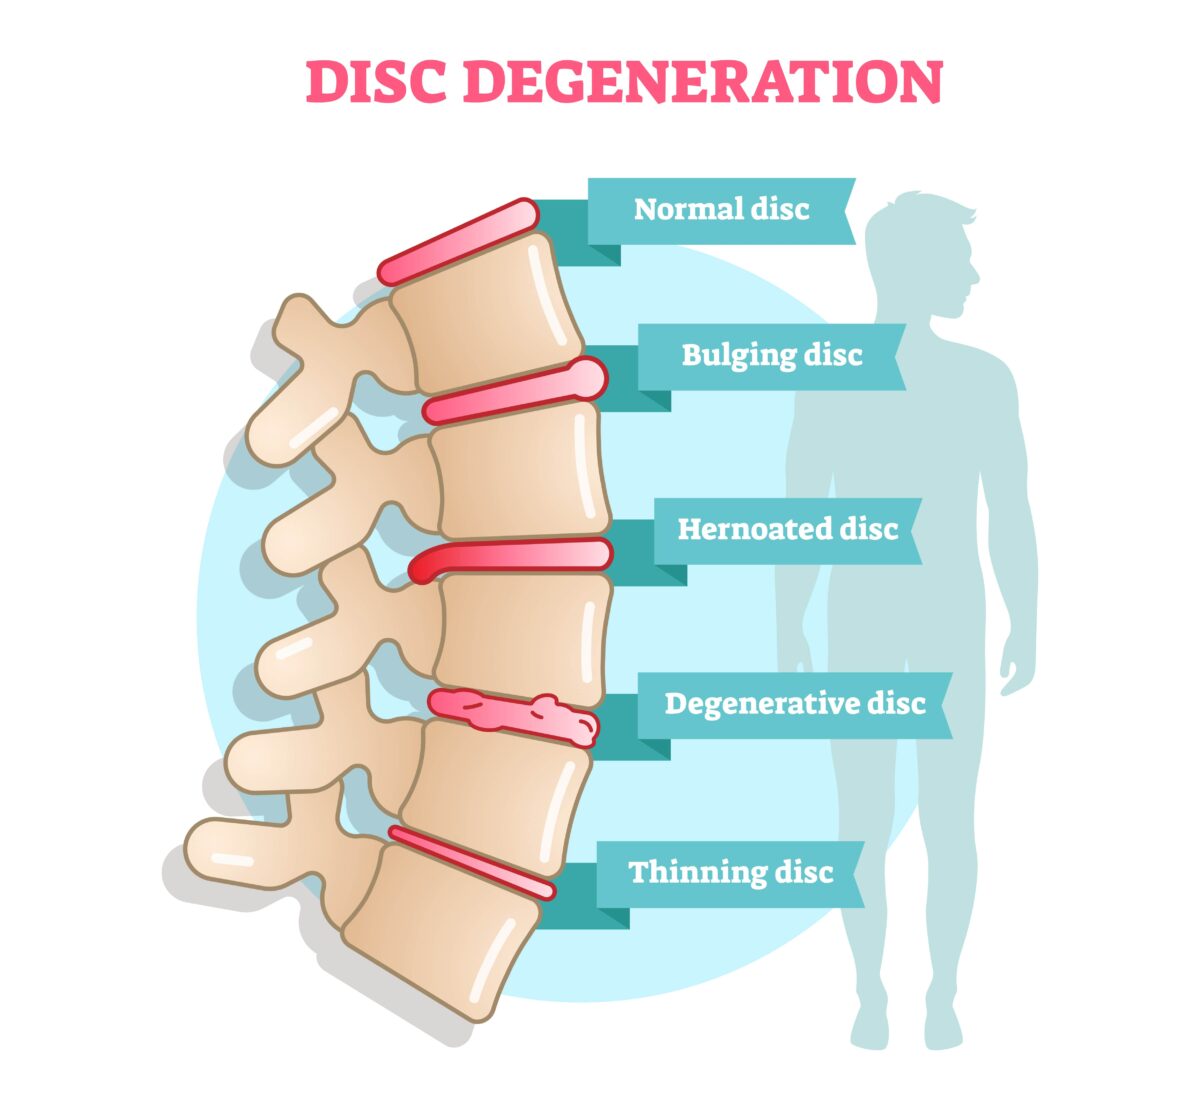 What triggers a bulging disc?